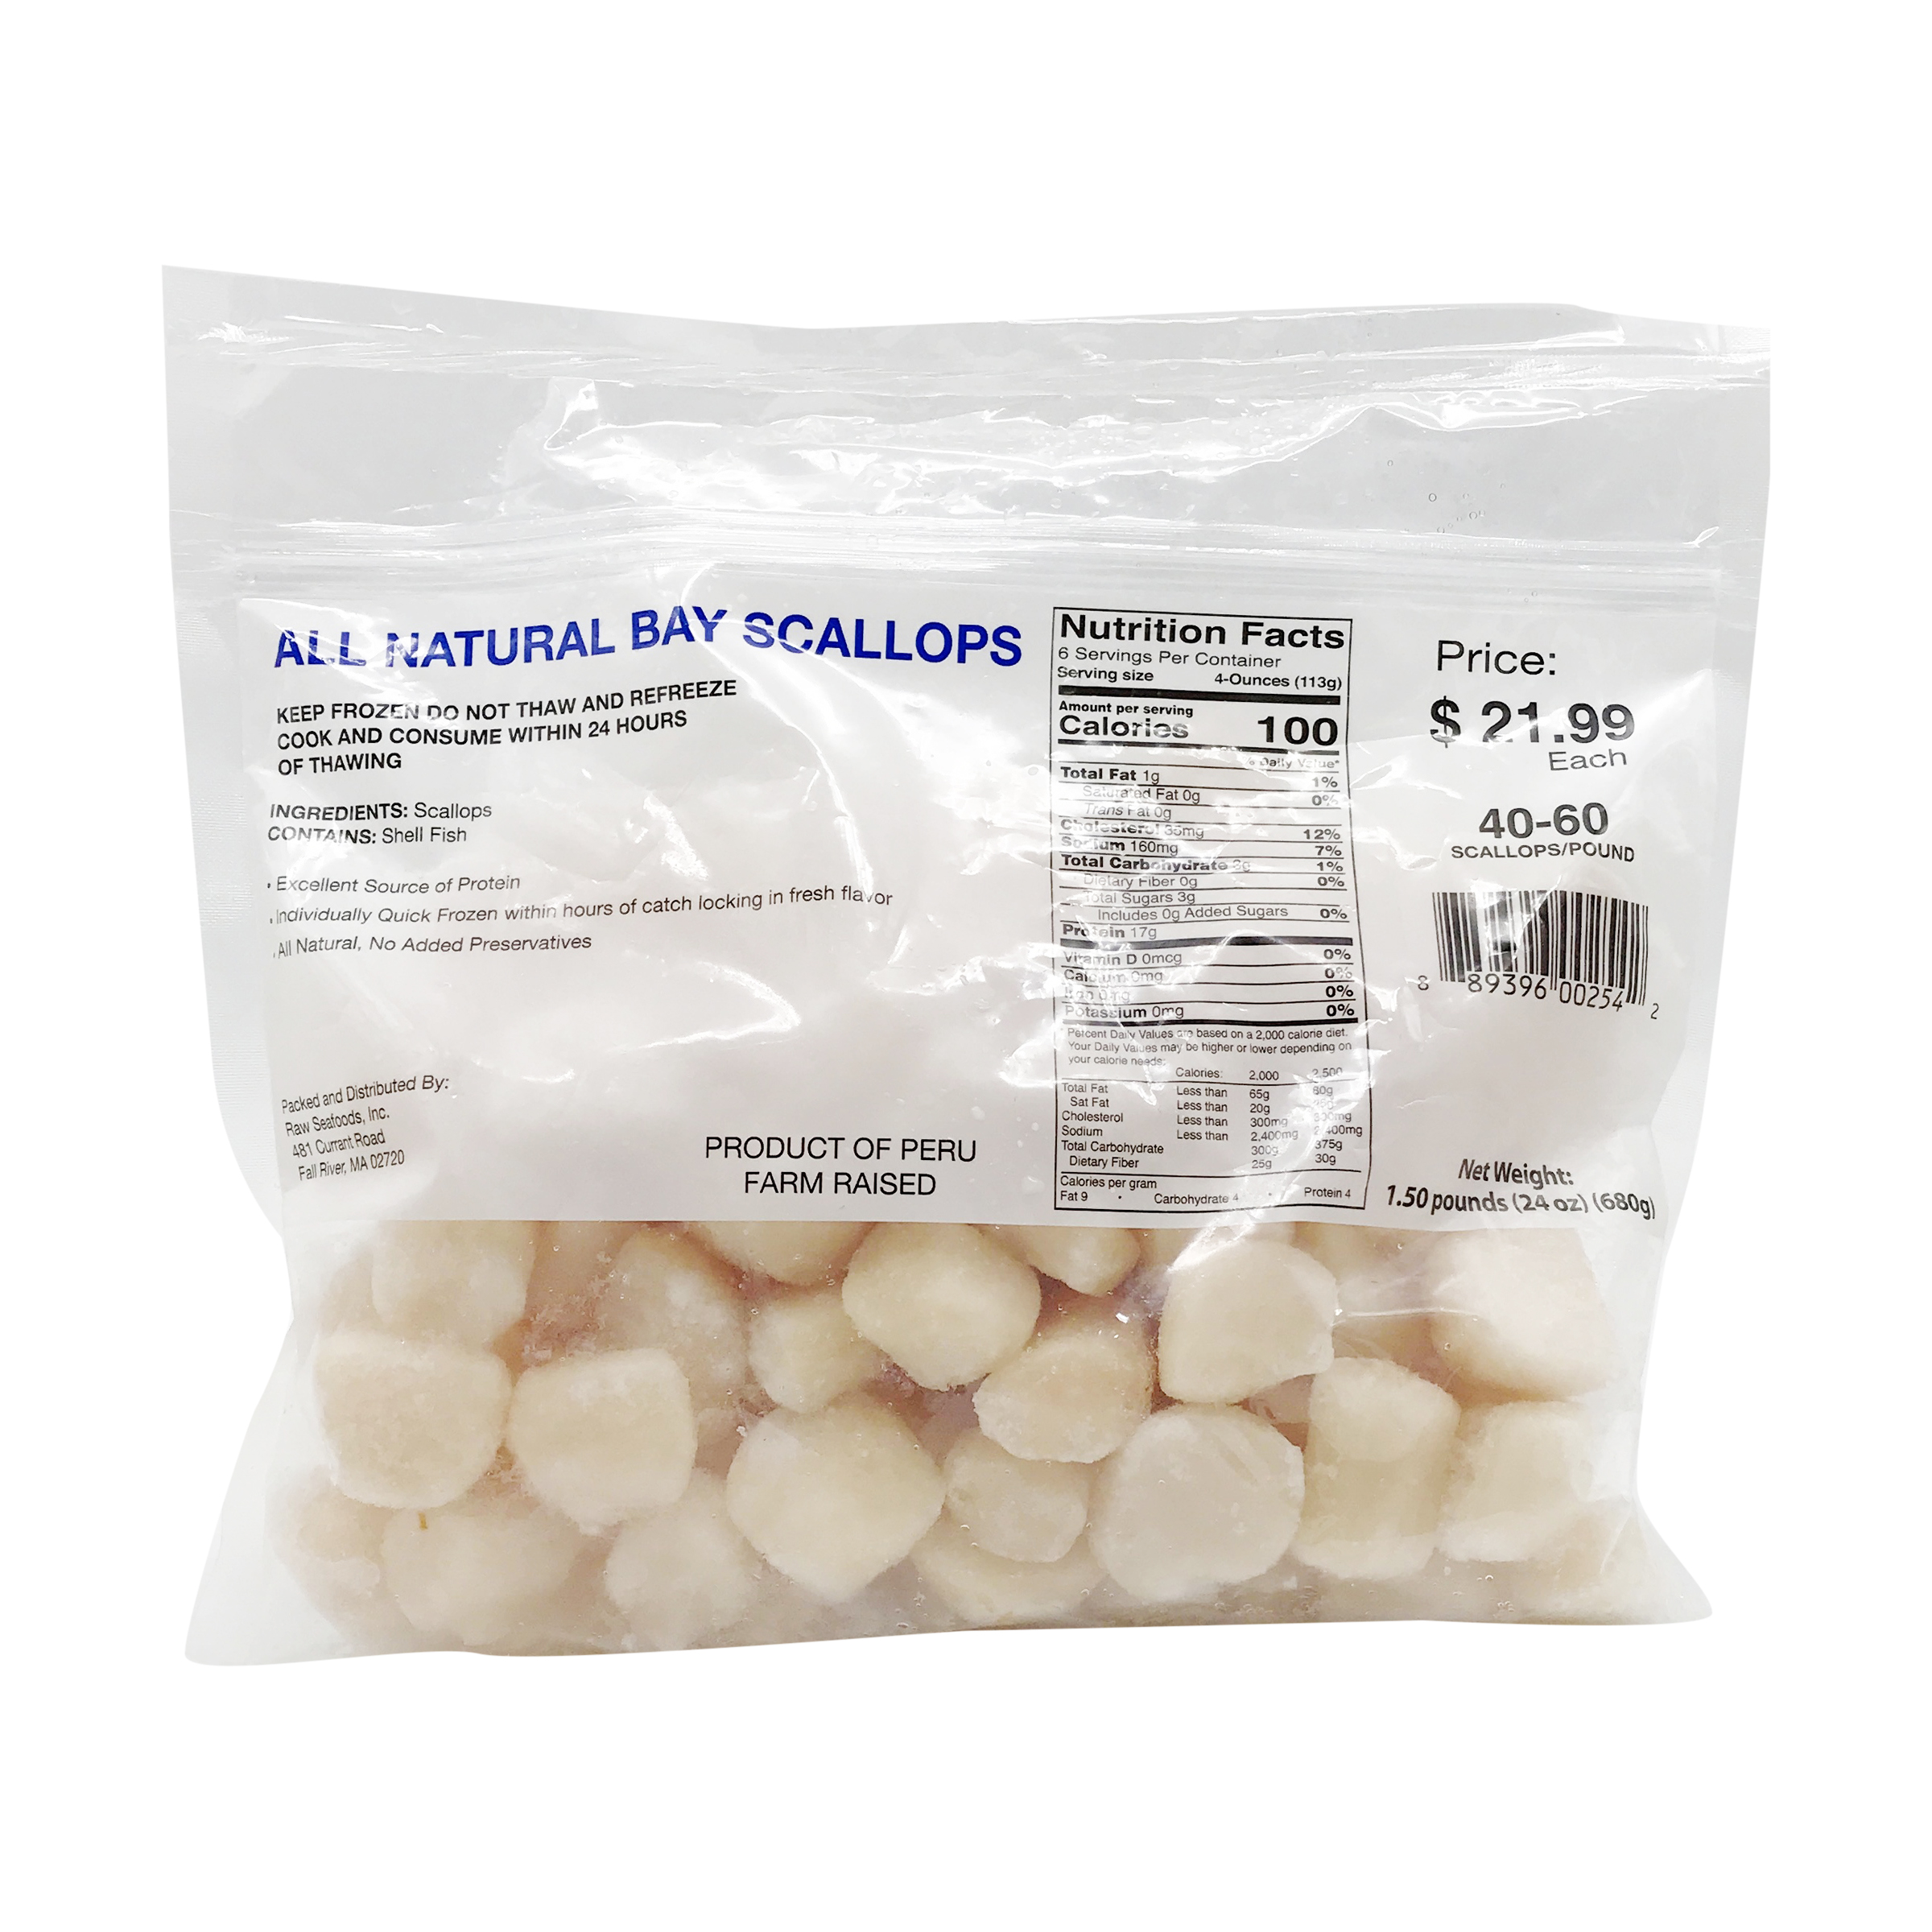 All Natural Bay Scallops 40 60 Scallops Lb 24 Oz Raw Seafoods Inc Whole Foods Market